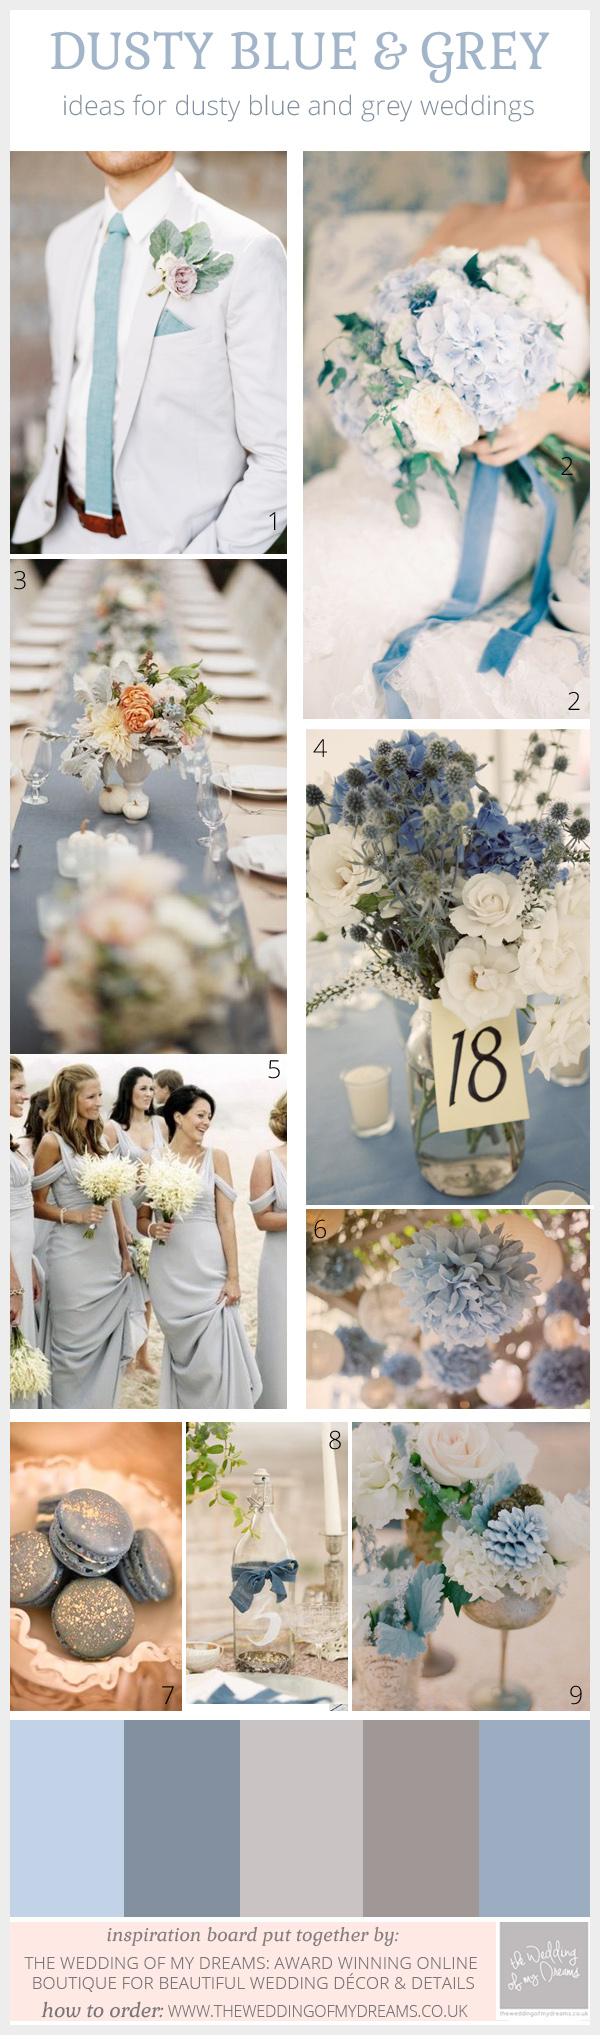 dusty blue and grey wedding inspiration and decorations